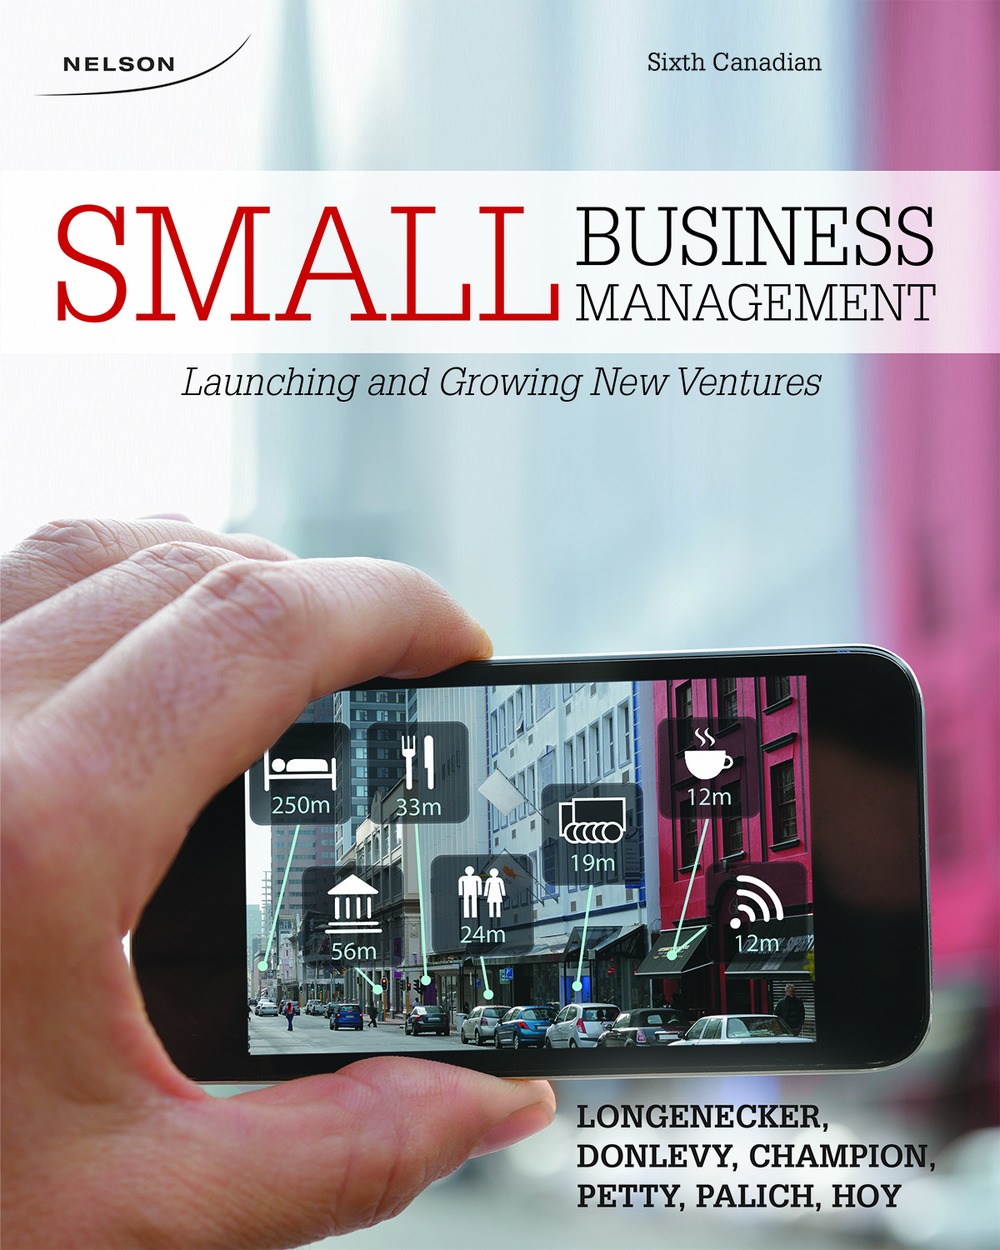 Small Business Management: Launching and Growing New Ventures, 6th Edition  - 9780176532215 - Cengage